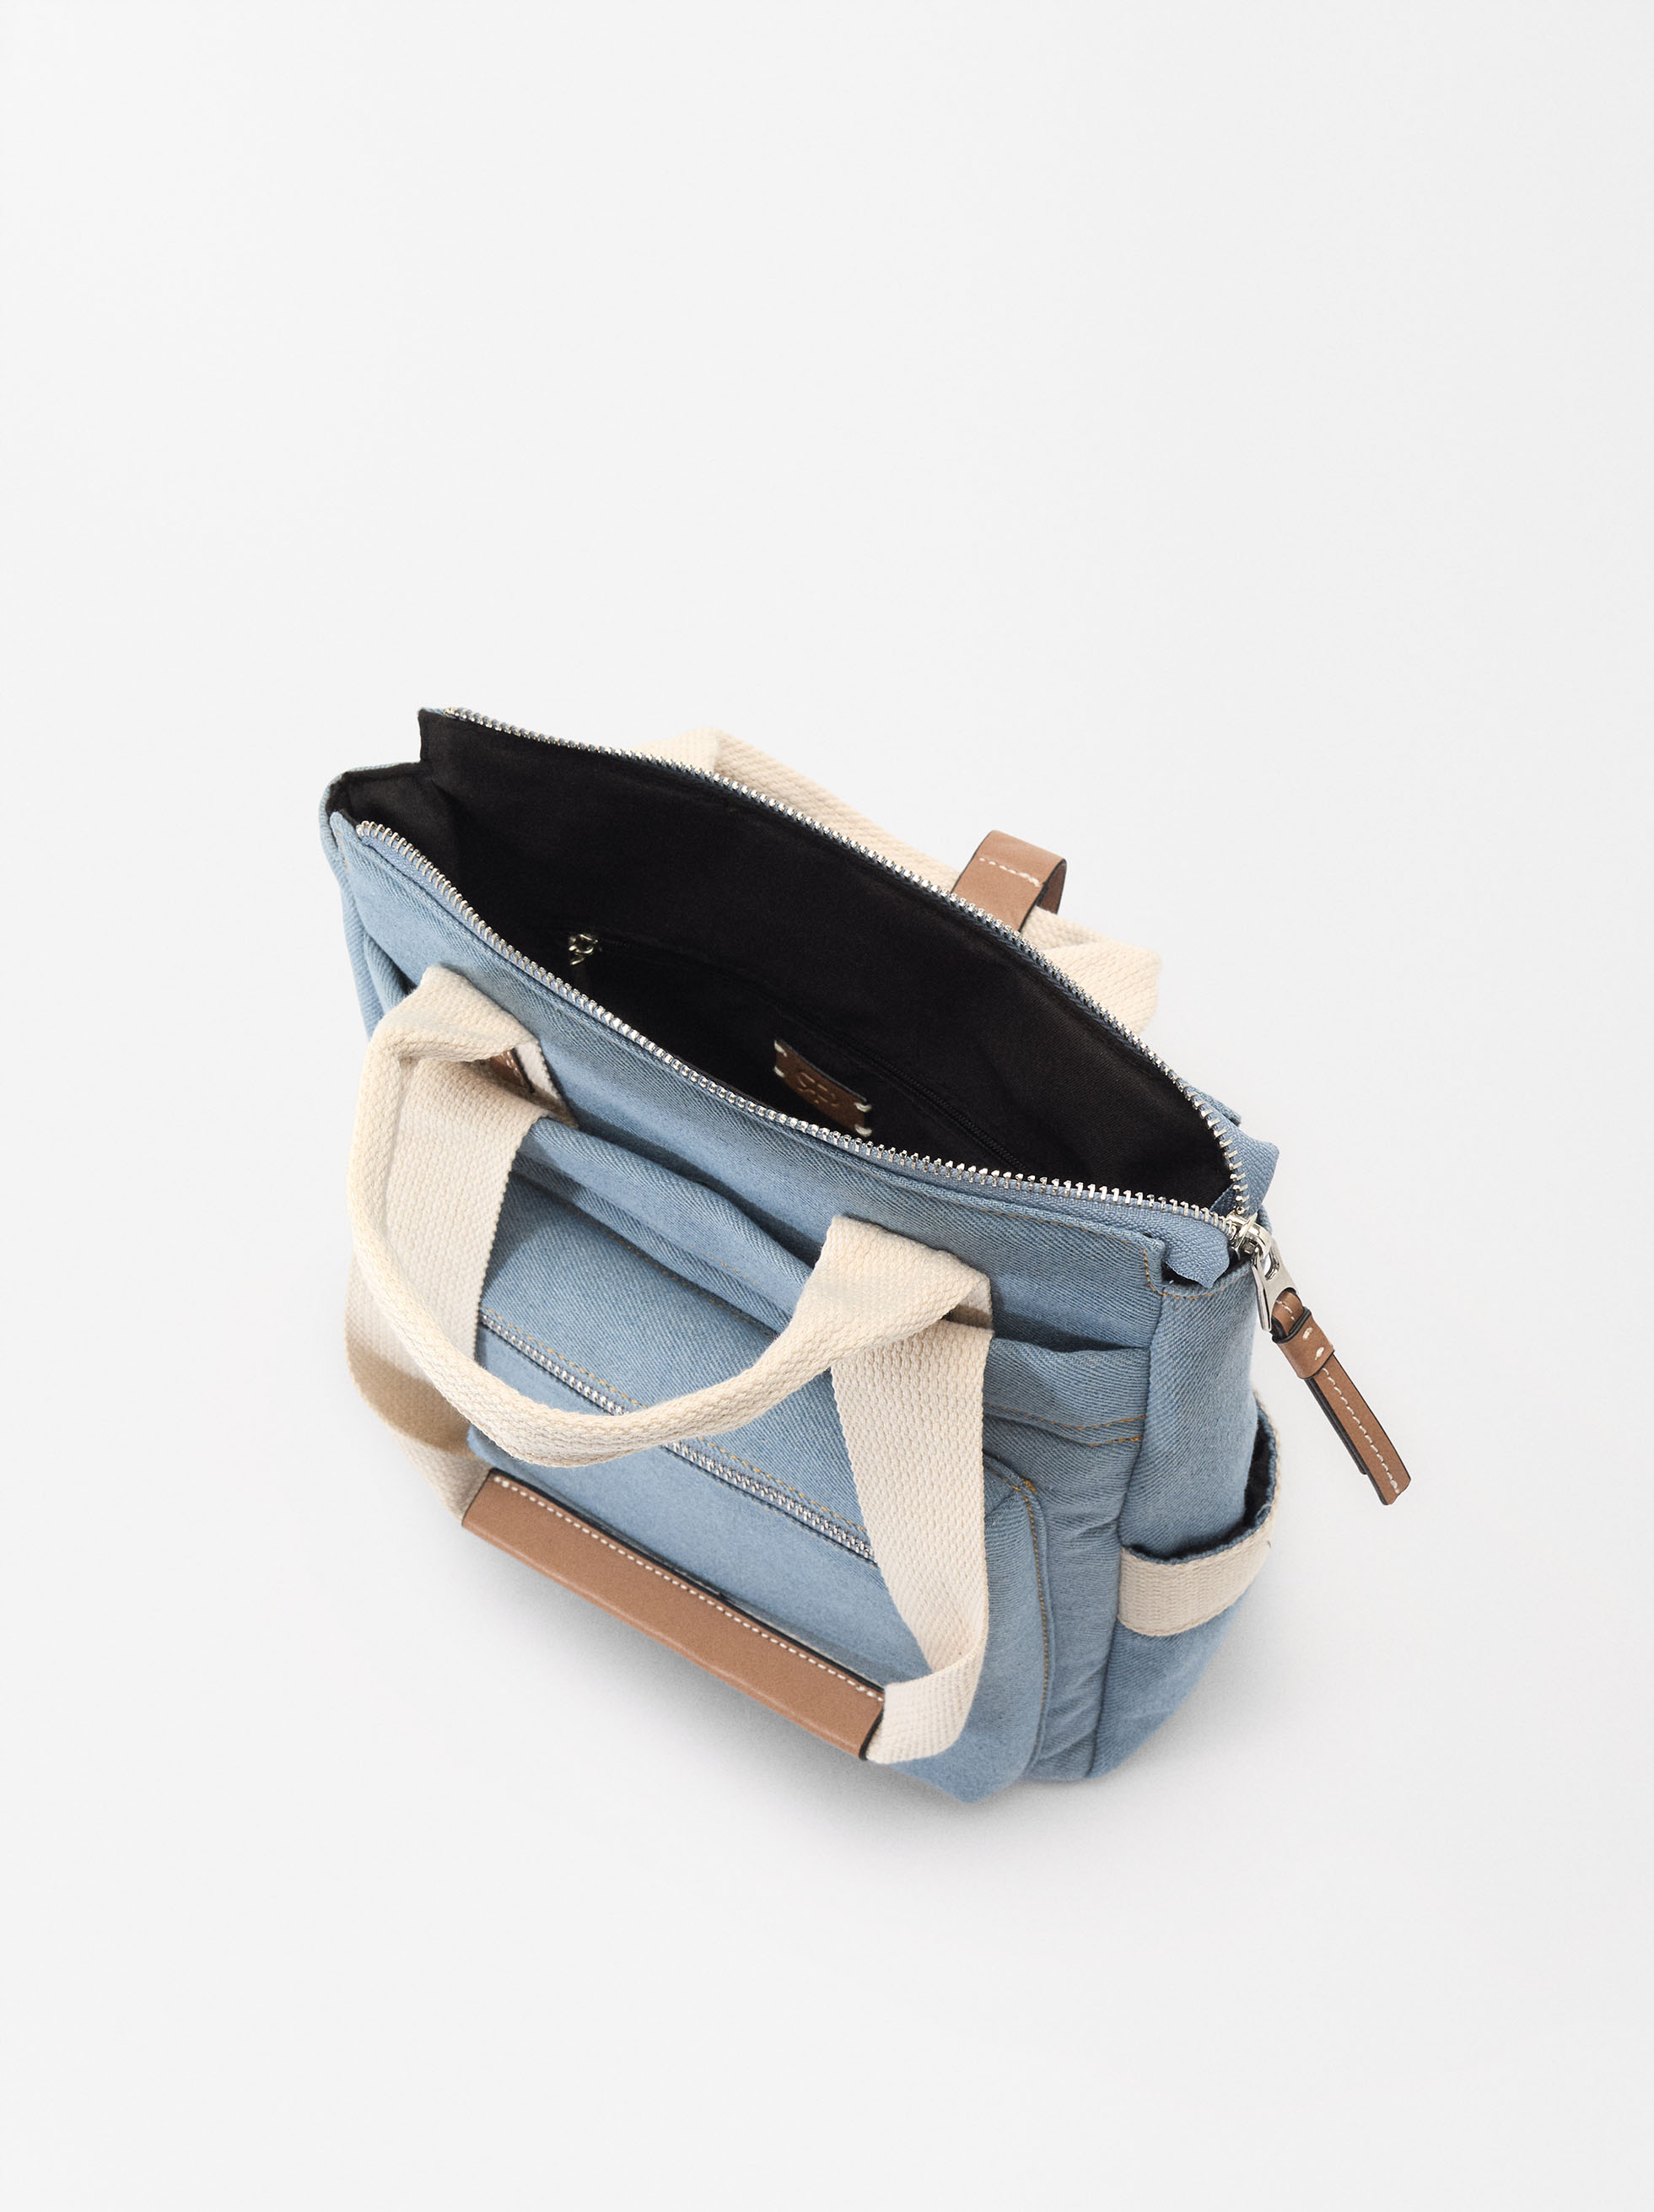 Denim Backpack With Multi-Way Straps image number 5.0